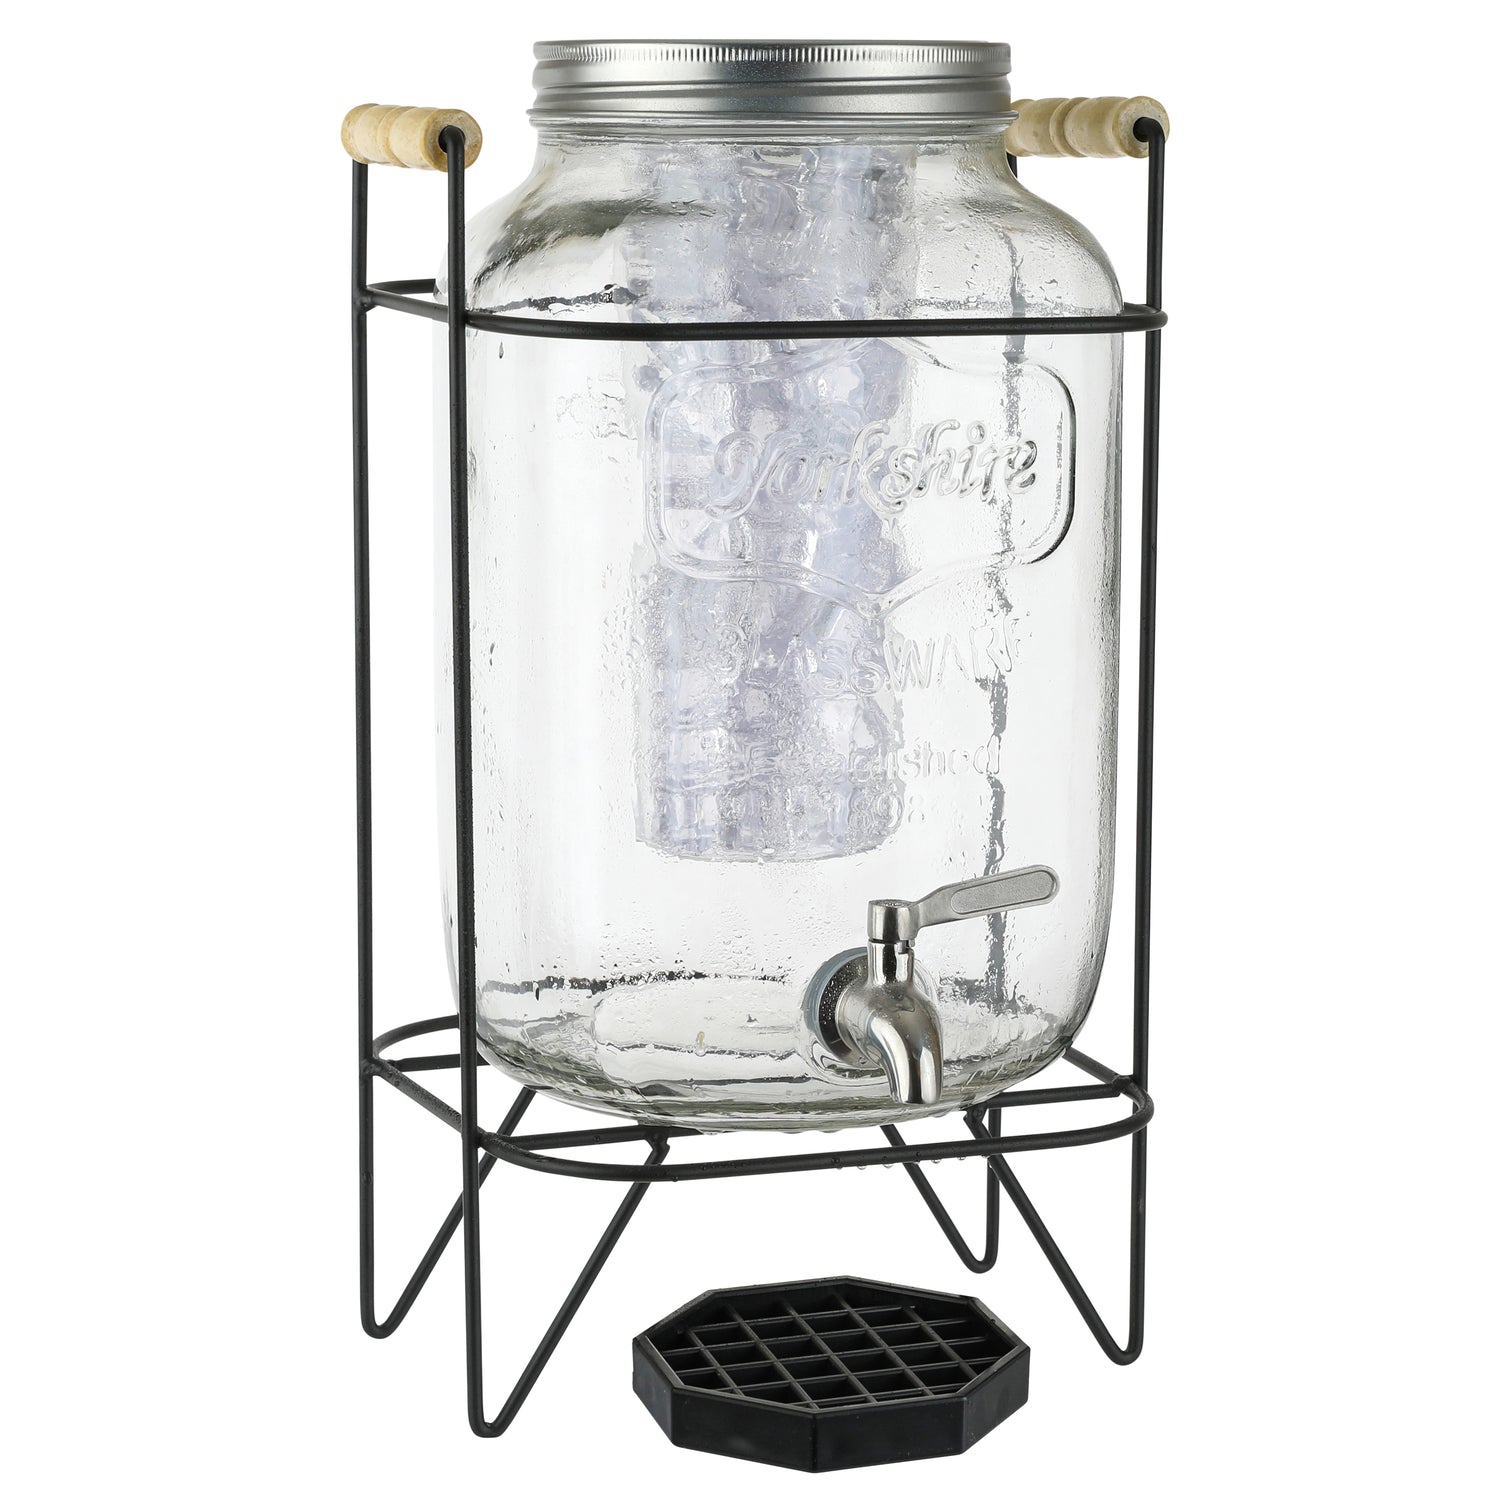 2 Gallon Glass Beverage Dispenser with Ice and Fruit Infusers, Metal Wire Stand with Wooden Handles, Drip Tray and Stainless Steel Spigot- Mason